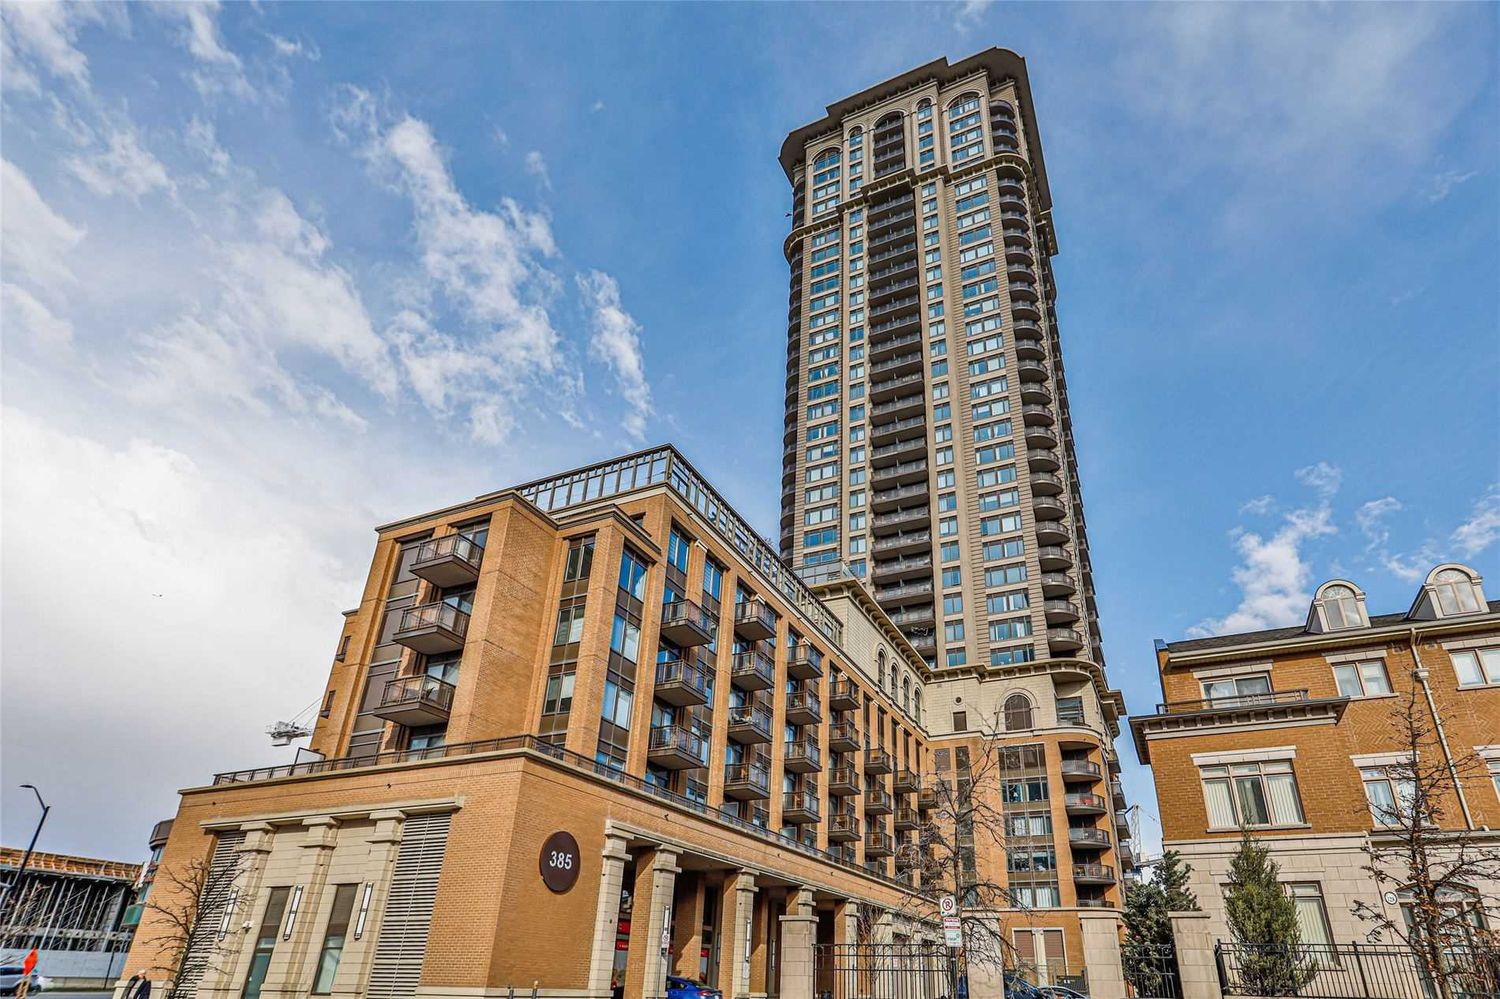 385 Prince of Wales Drive. Chicago Condos is located in  Mississauga, Toronto - image #1 of 2